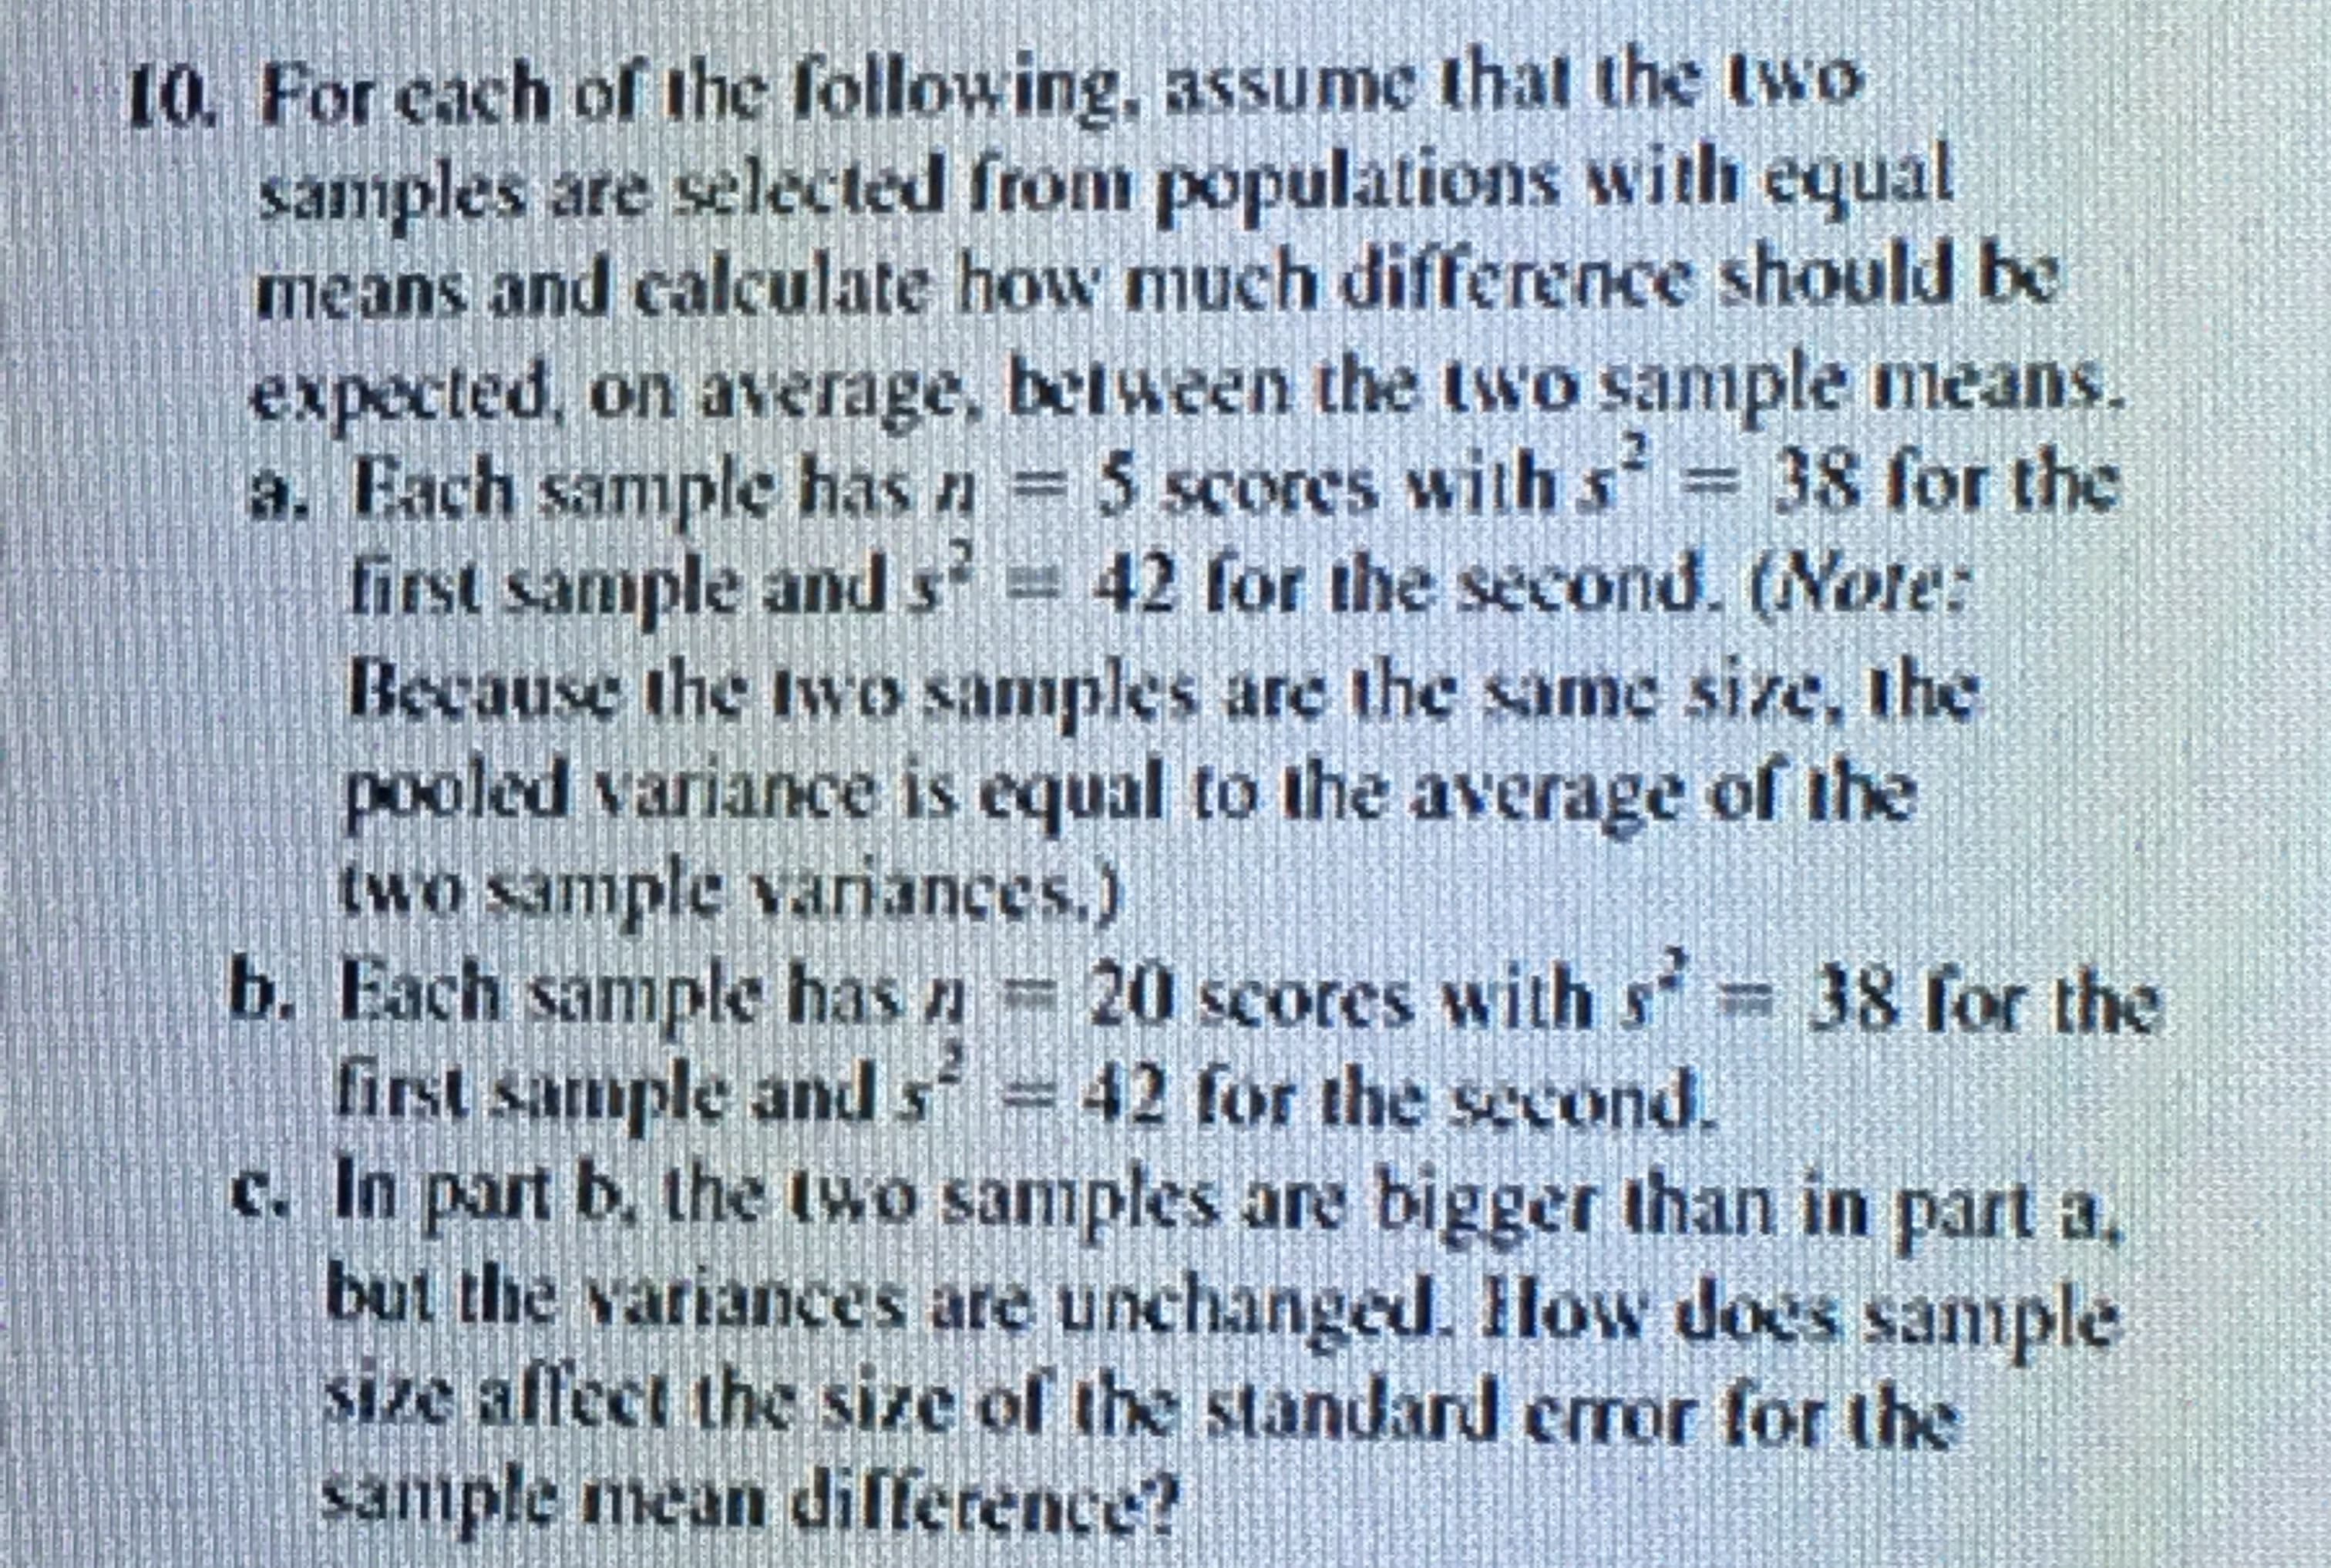 10. For each of the following, assume that the two
samples are selected from populations with equal
means and calculate how much difference should be
expected, on average, between the two sample means.
Each sample has n 5 scores with s
first sample and s 42 for the second. (Note:
Because the Iwo samples are the same size, the
pooled variance is equal to the average of the
two sample variances.)
38 for the
